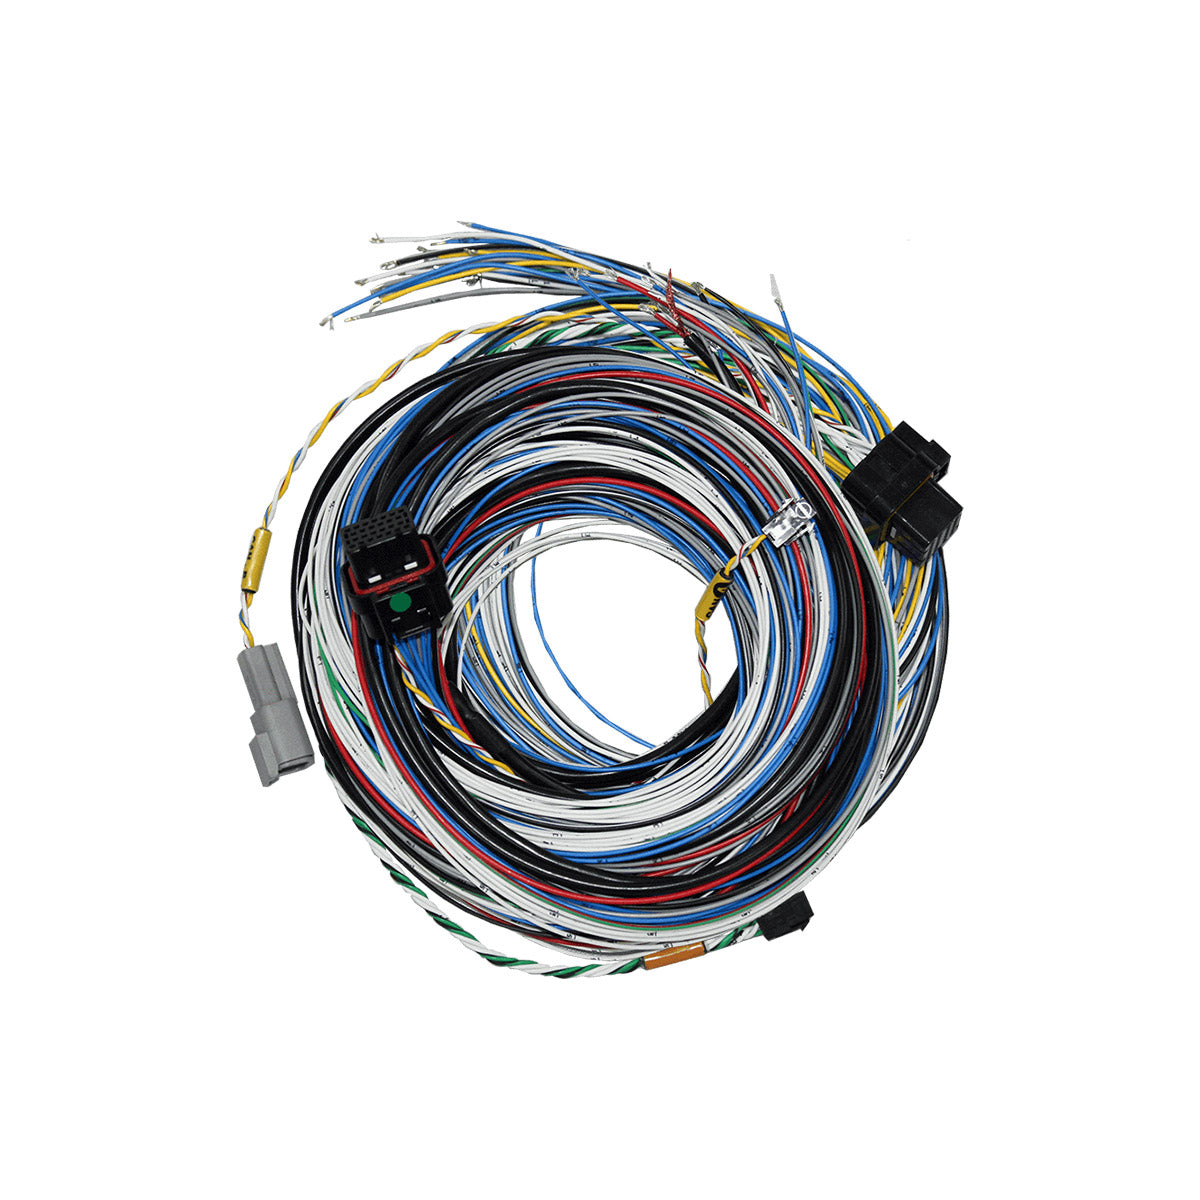 FUELTECH FT550 UNTERMINATED HARNESS